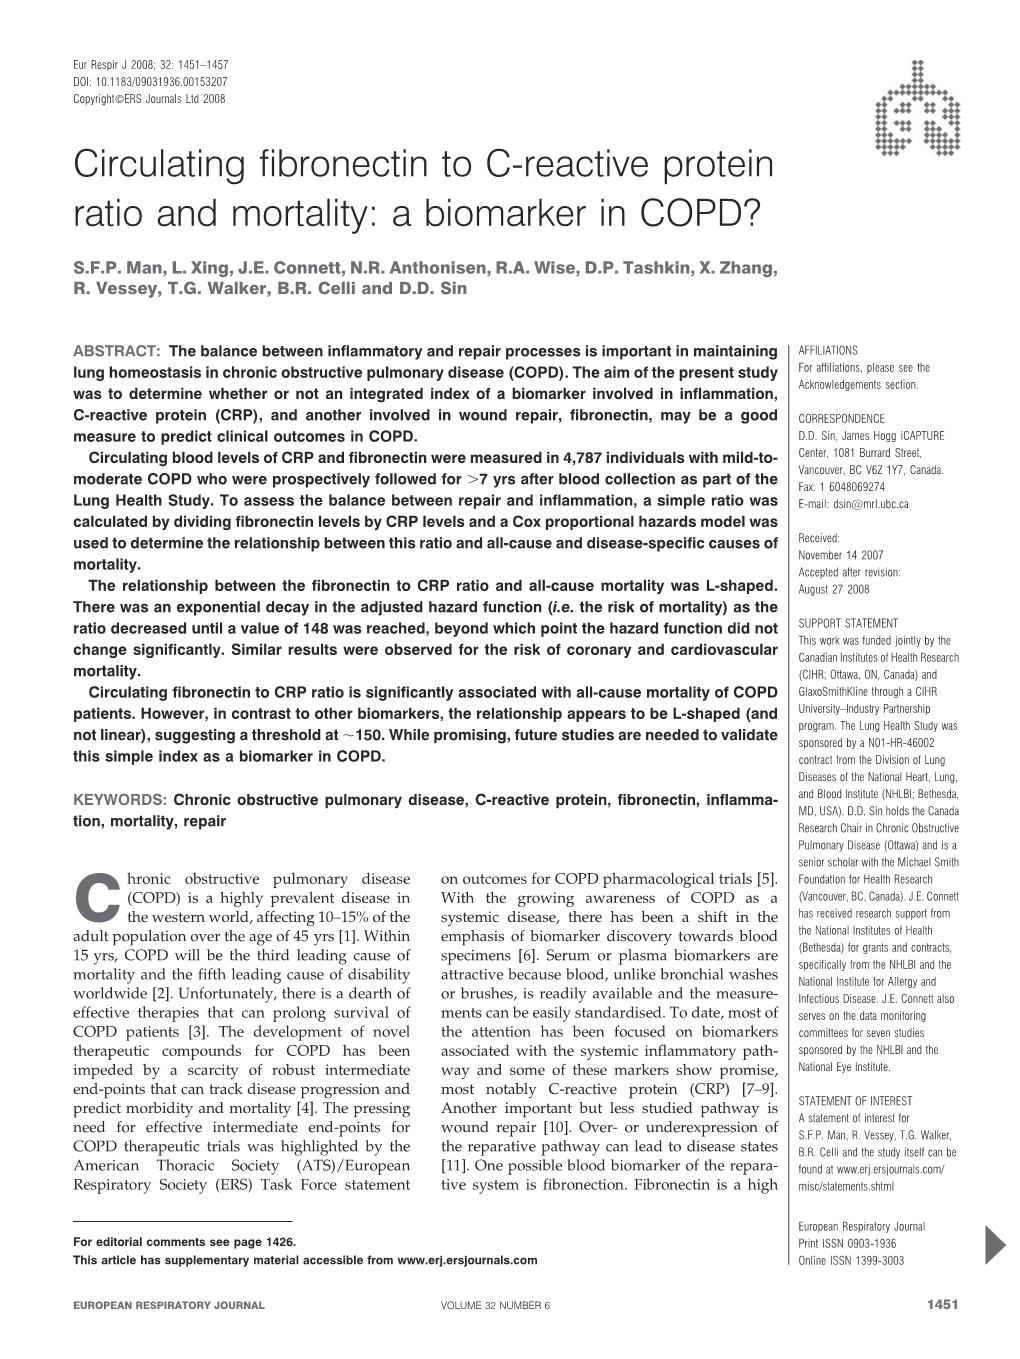 Circulating Fibronectin to C-Reactive Protein Ratio and Mortality: a Biomarker in COPD?